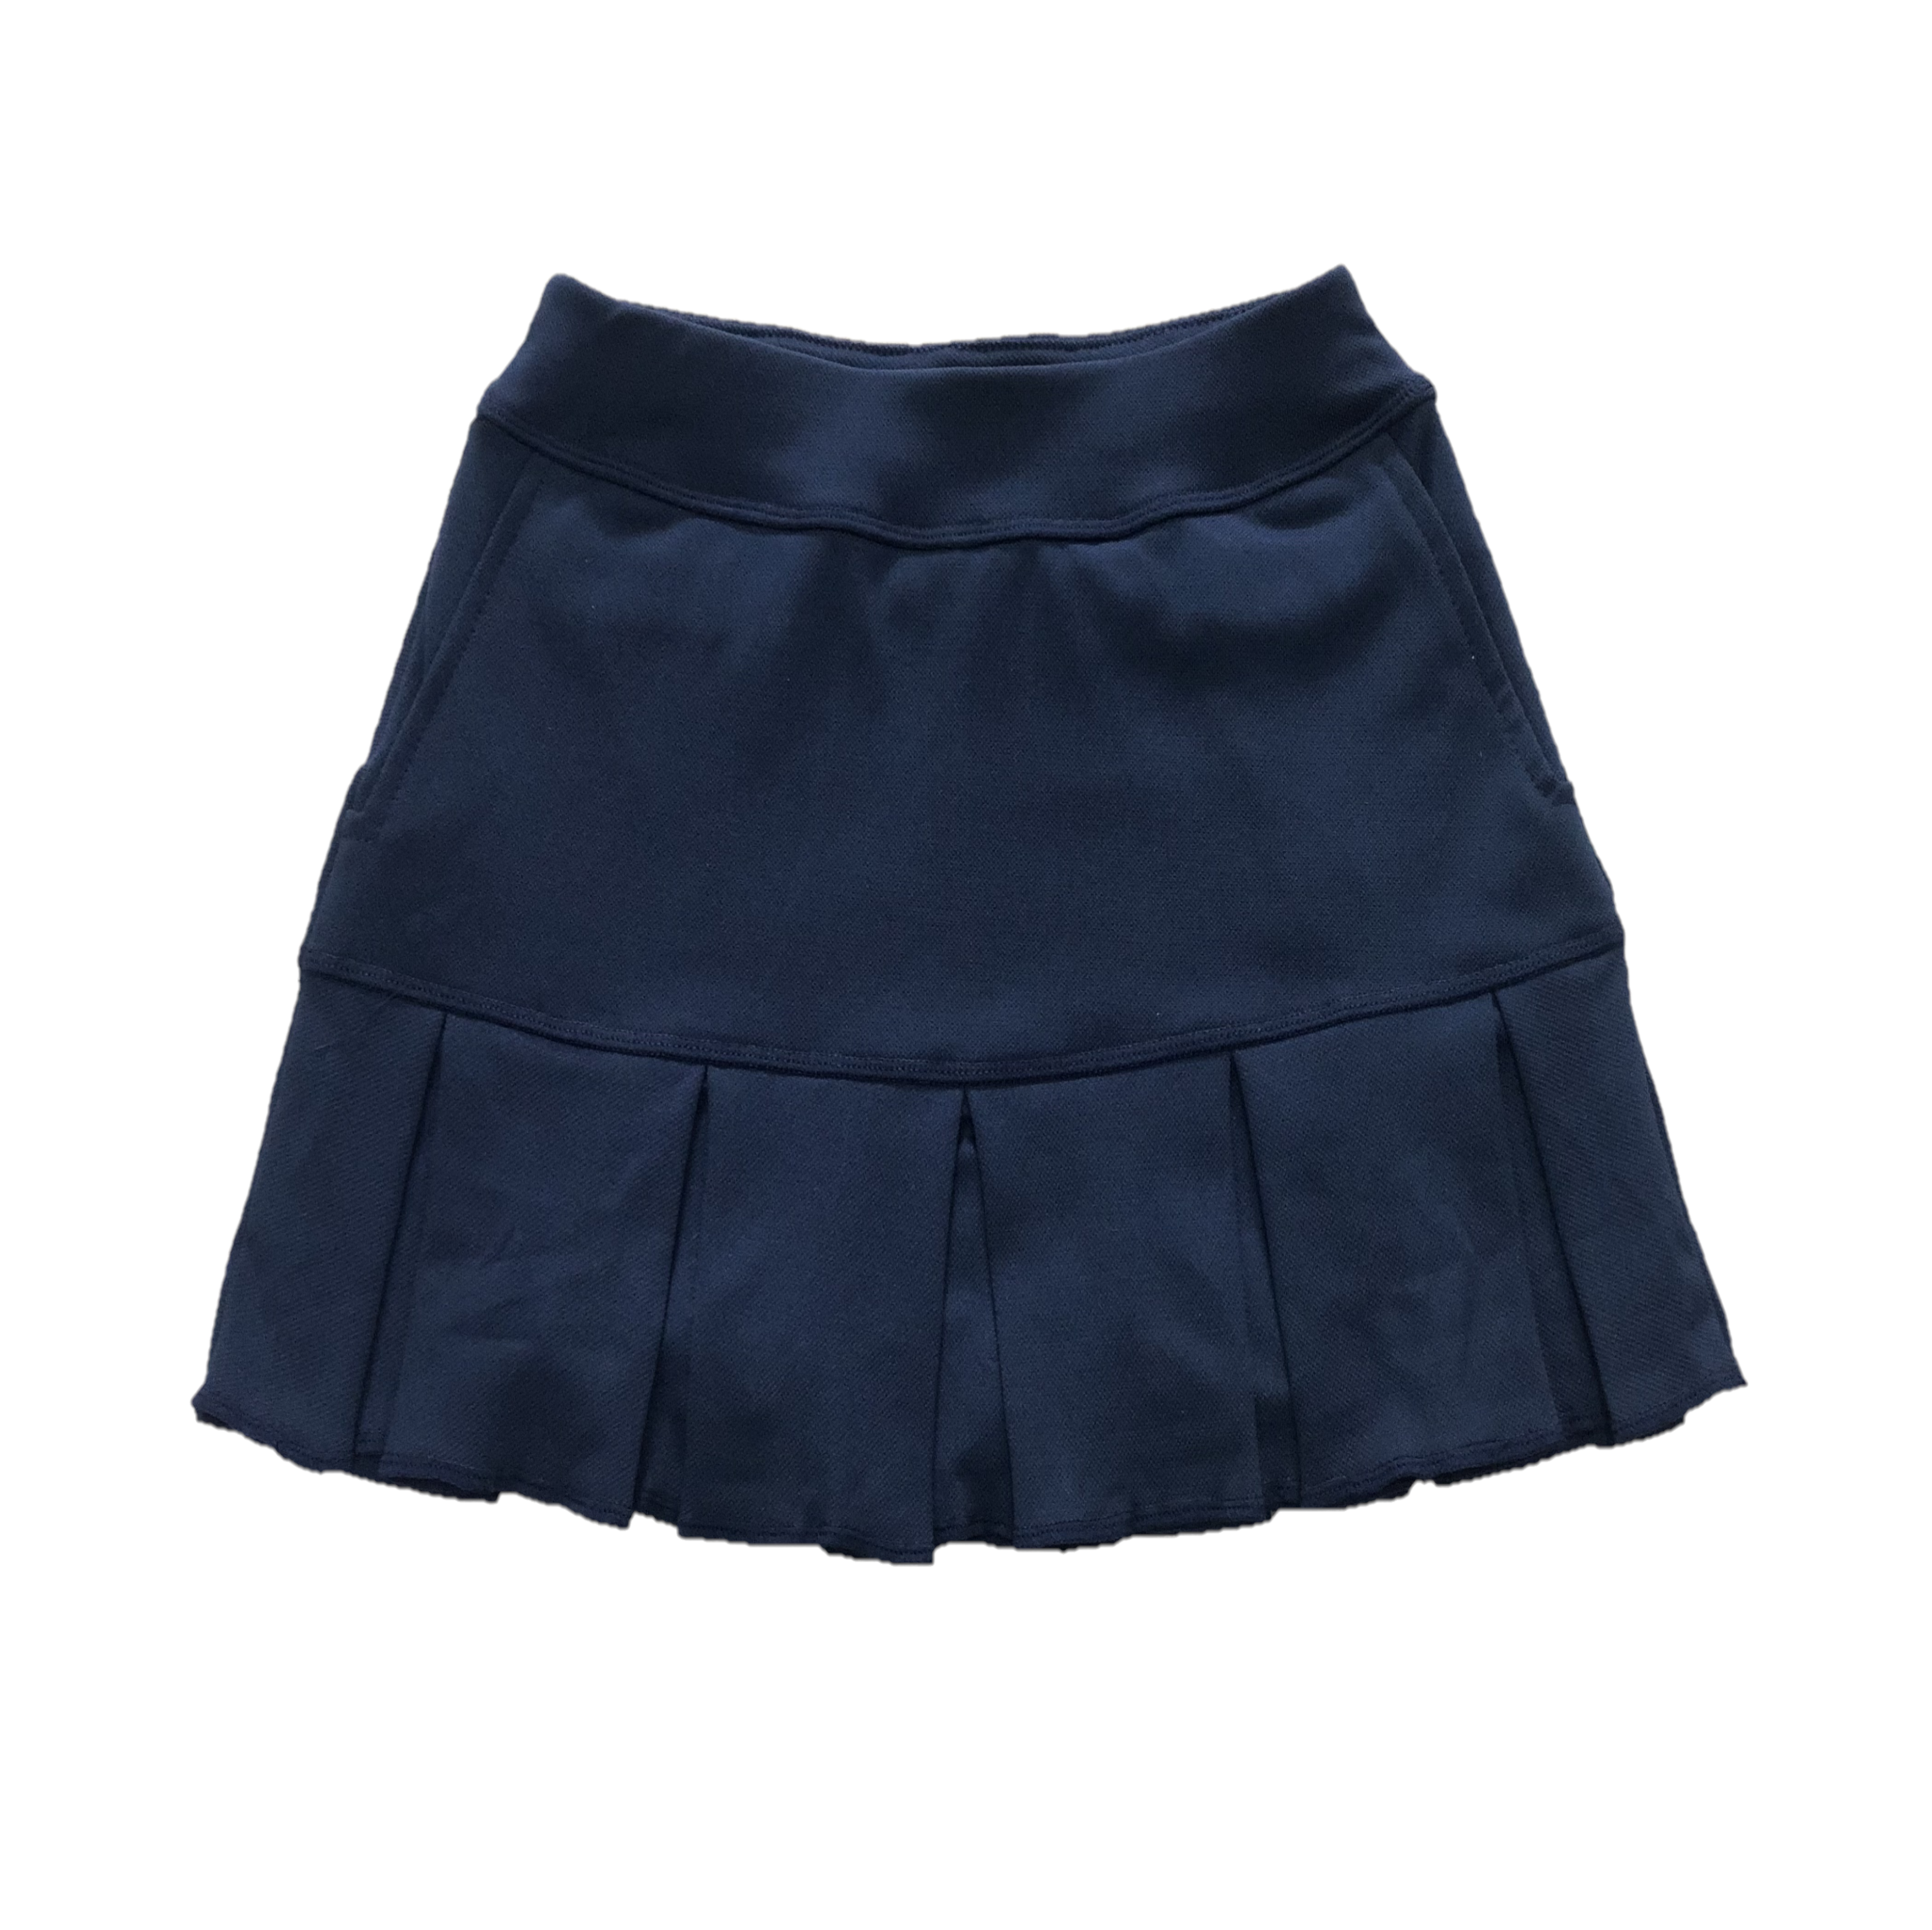 LS-064E || Skirt Navy Blue with 2 Rear Pockets and Pleated Hem